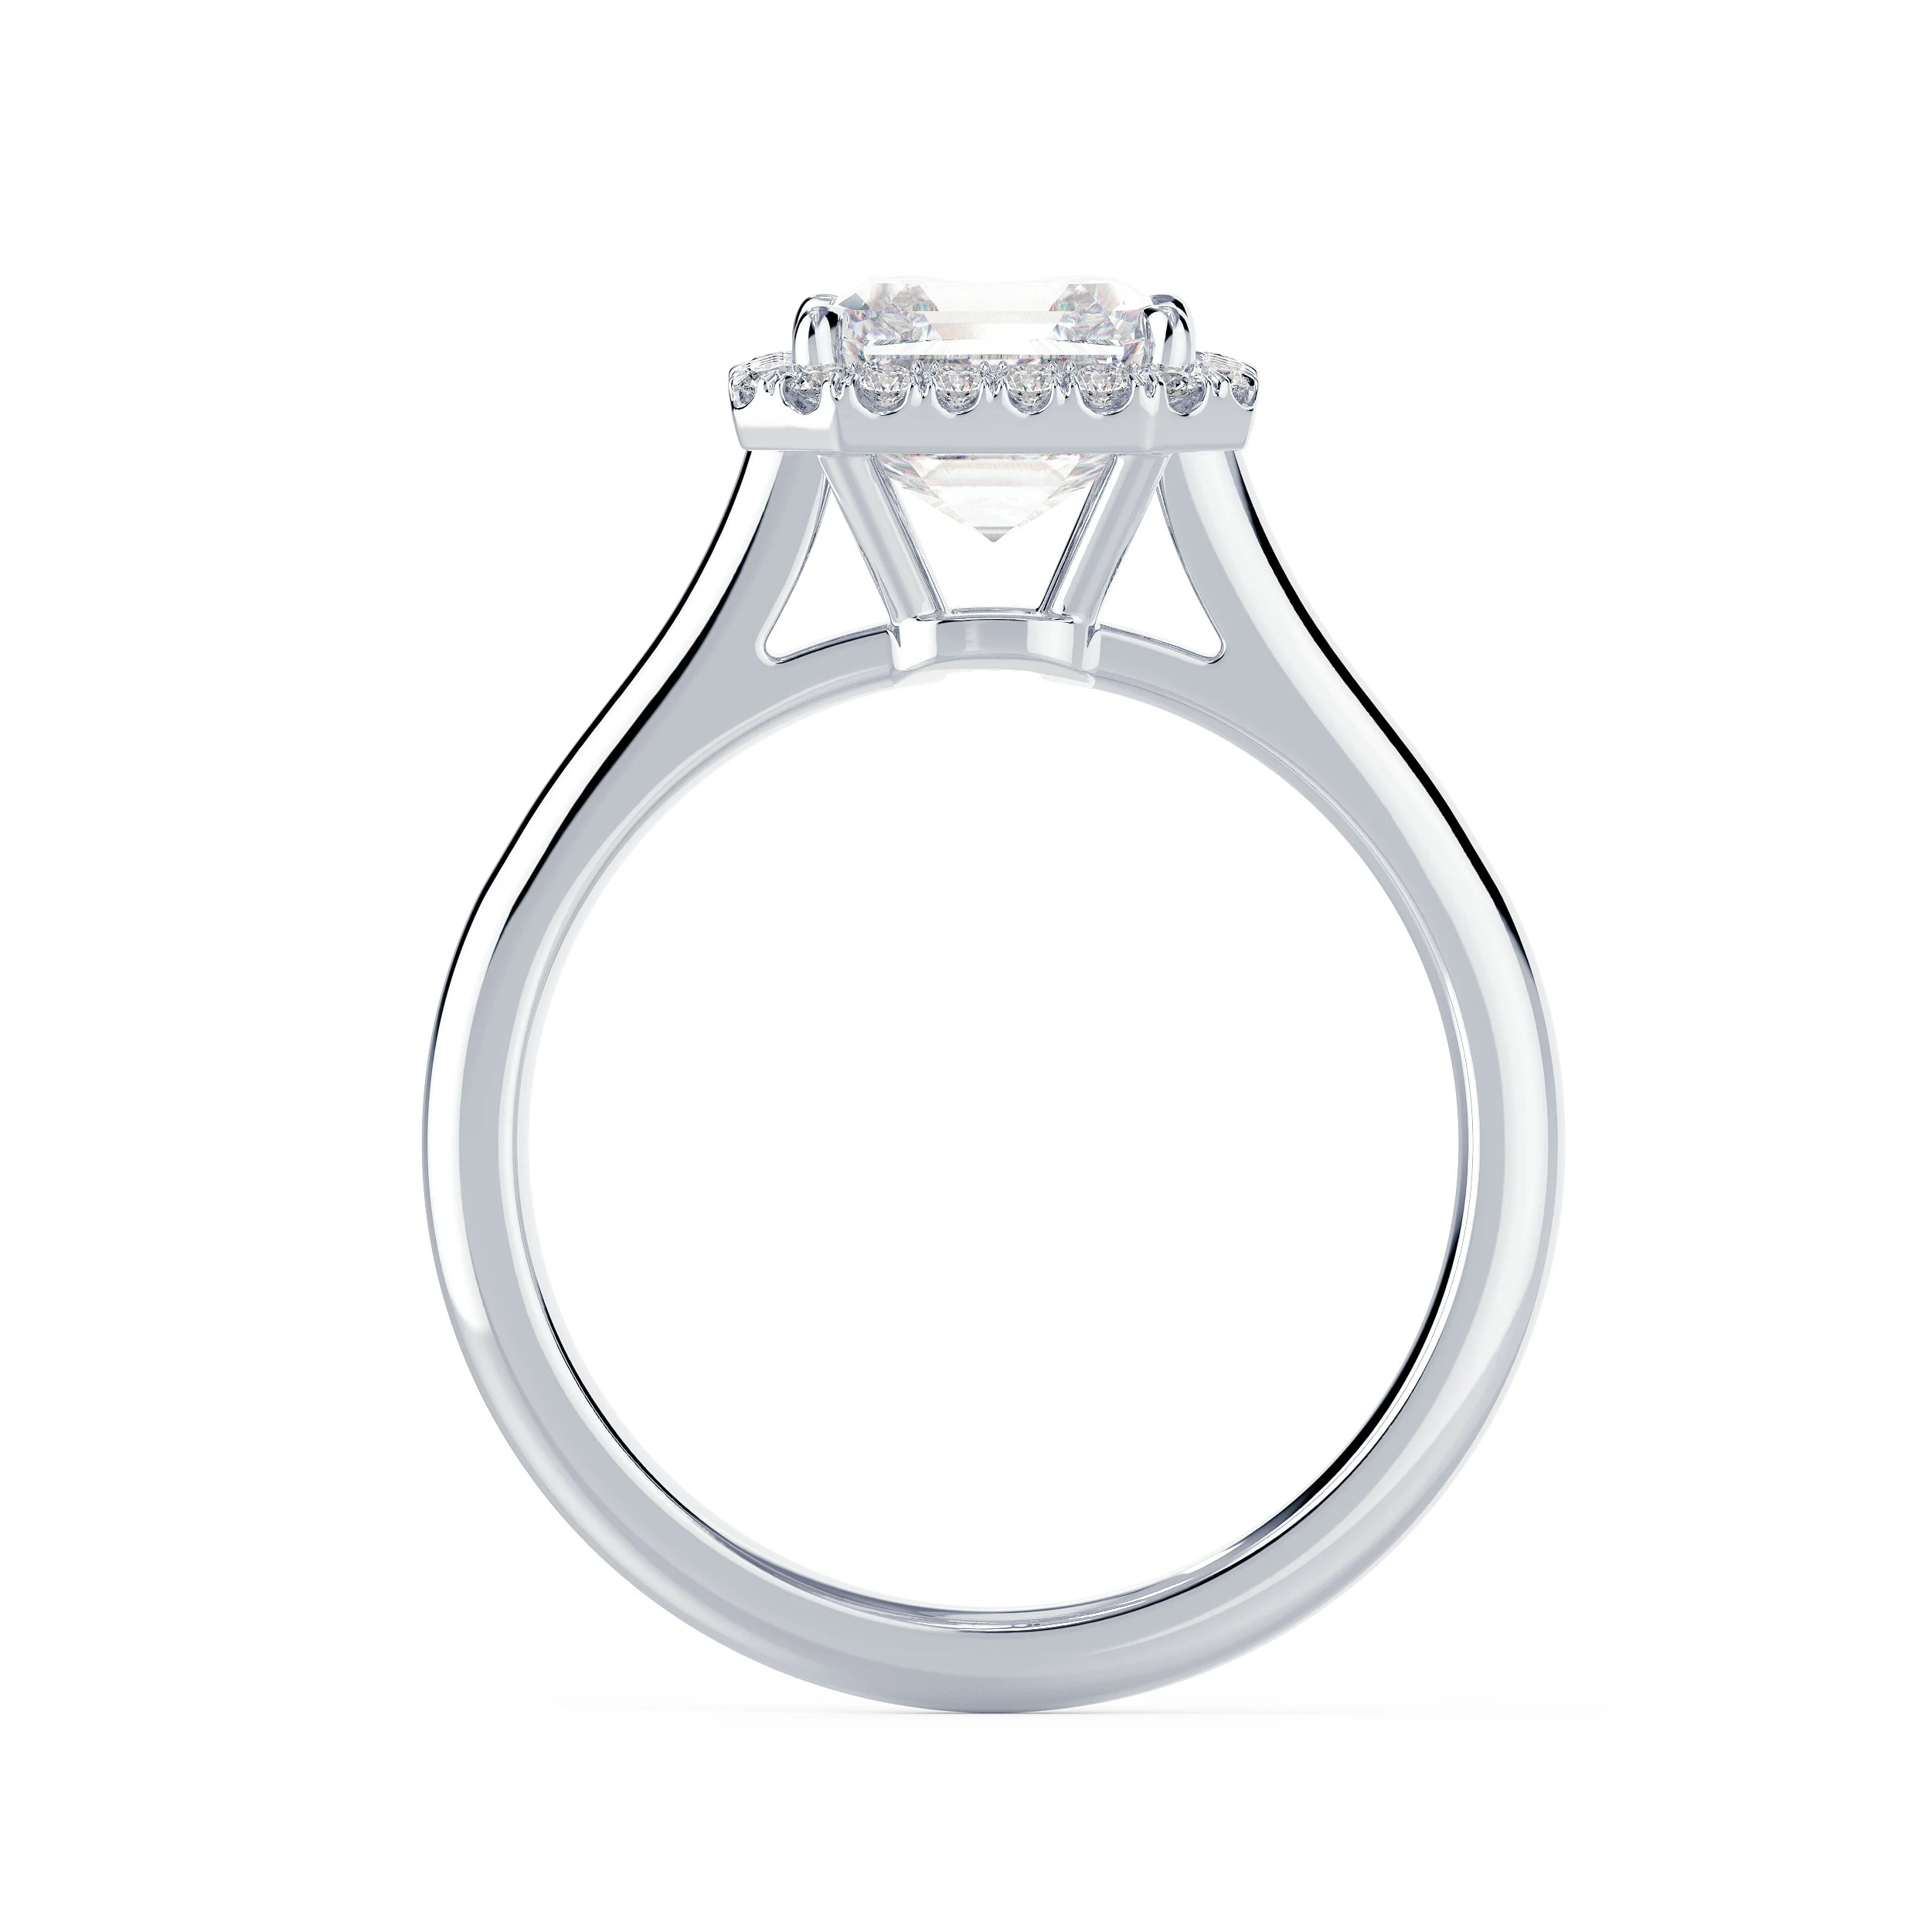 18 Karat White Gold Asscher Single Halo Setting featuring Hand Selected 2.0 ct Lab Diamonds (Profile View)